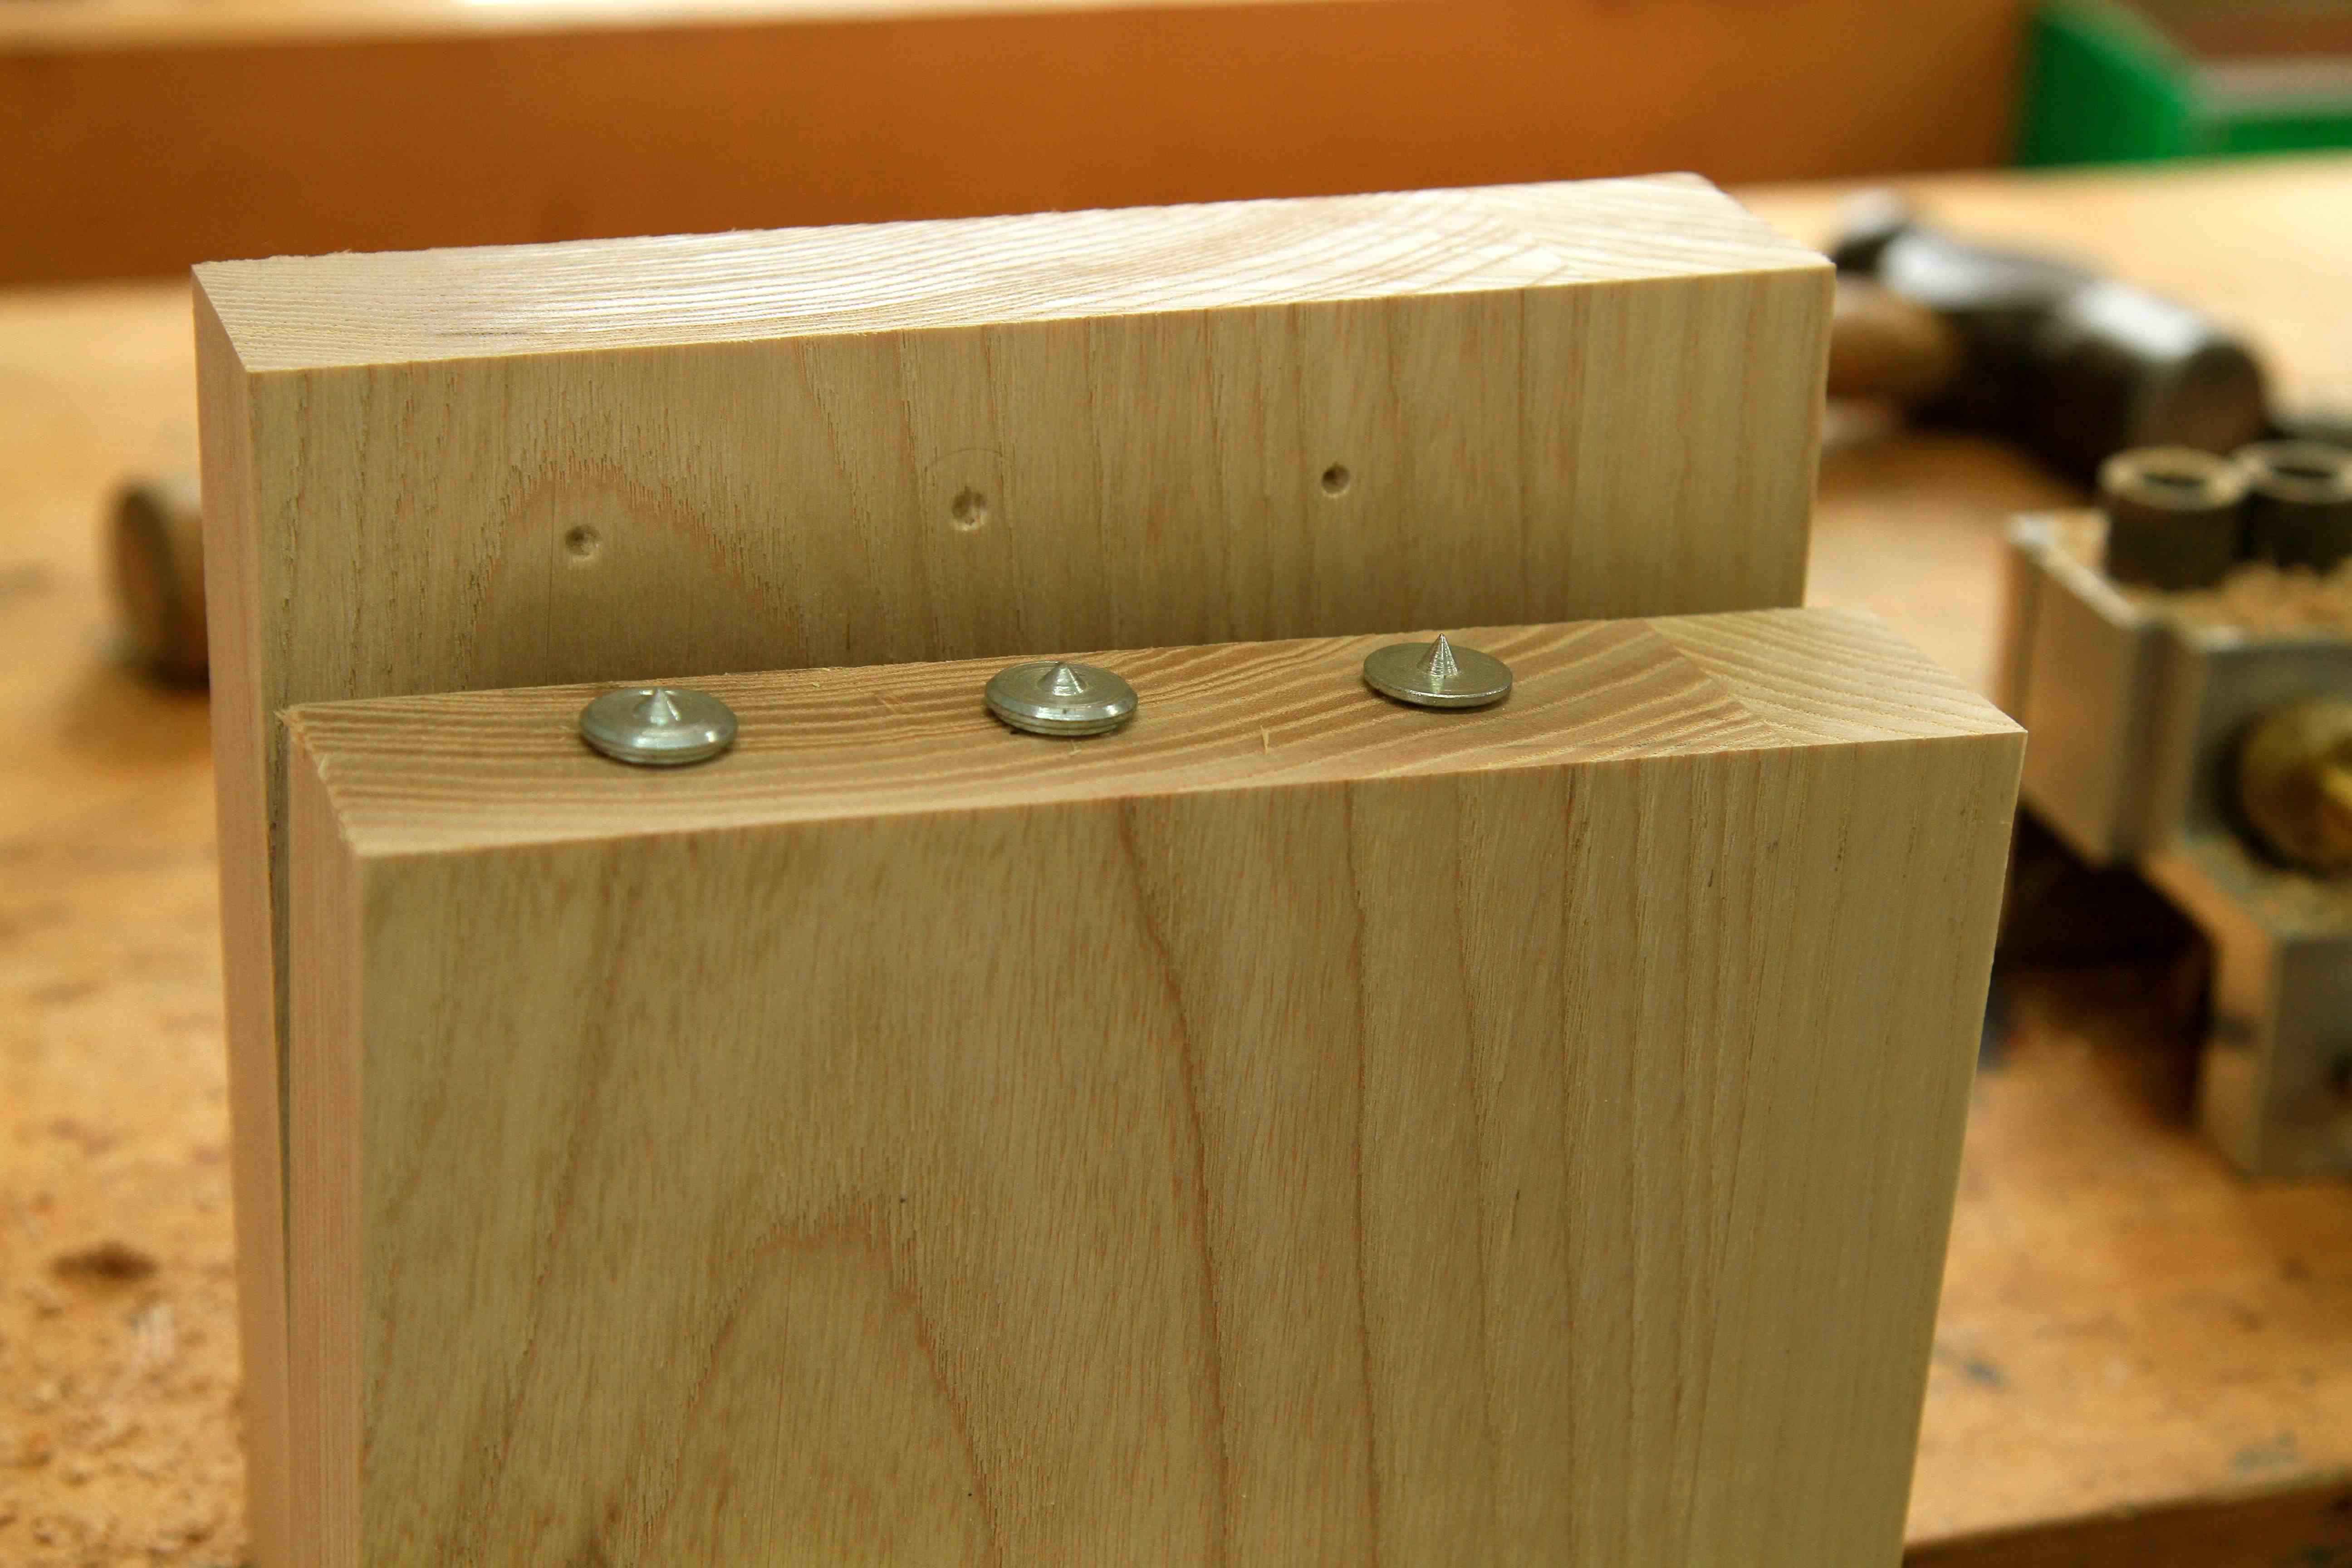 how many dowels to use woodworking? 2